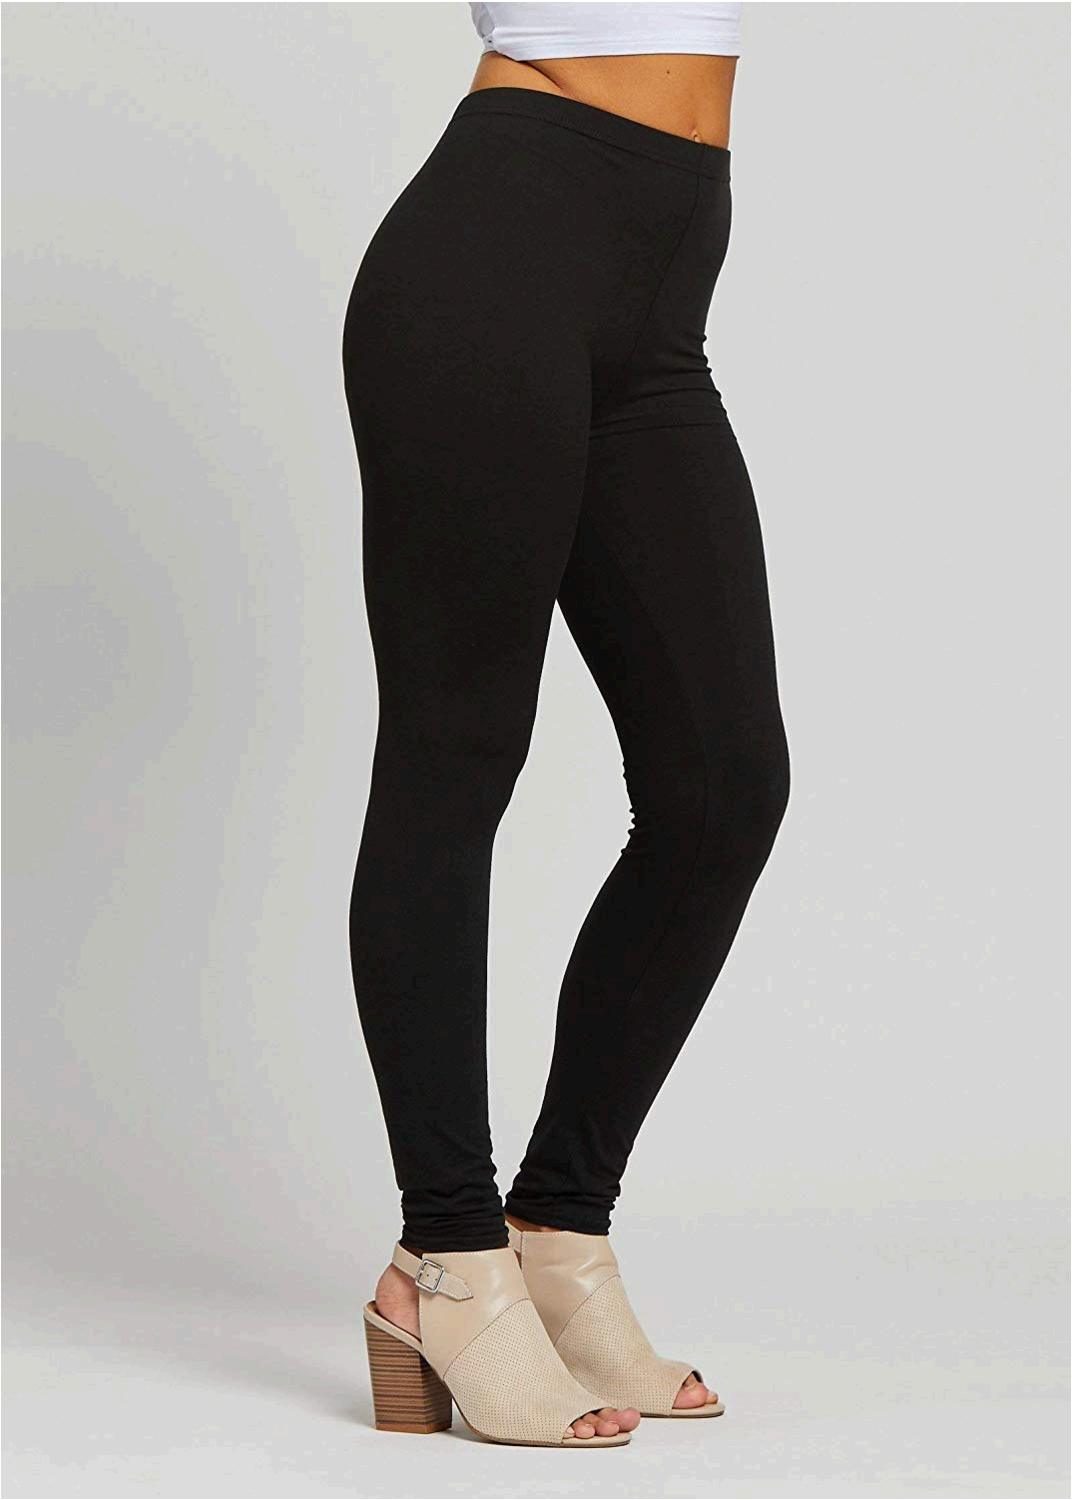  Conceited Dark Charcoal Premium Ultra Soft High Waisted  Leggings For Women